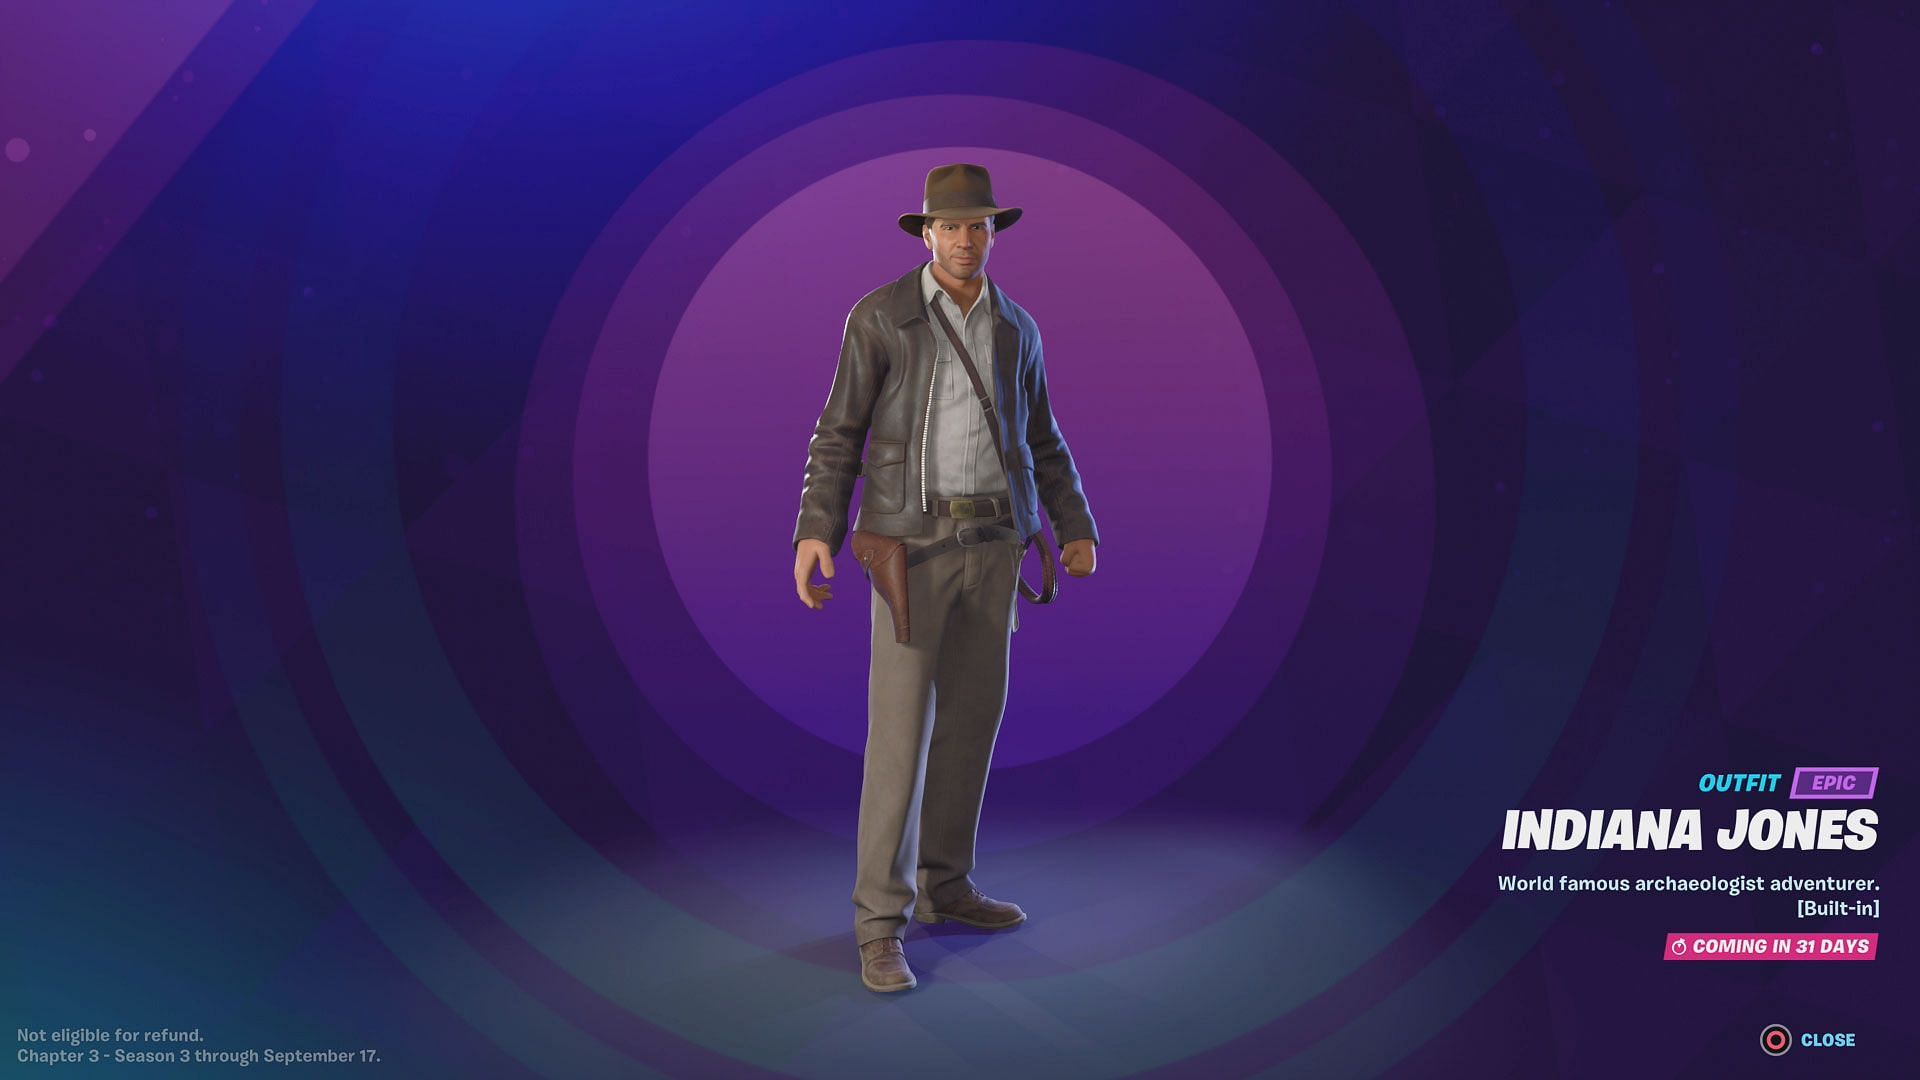 Indiana Jones is finally available in Fortnite (Image via Epic Games)